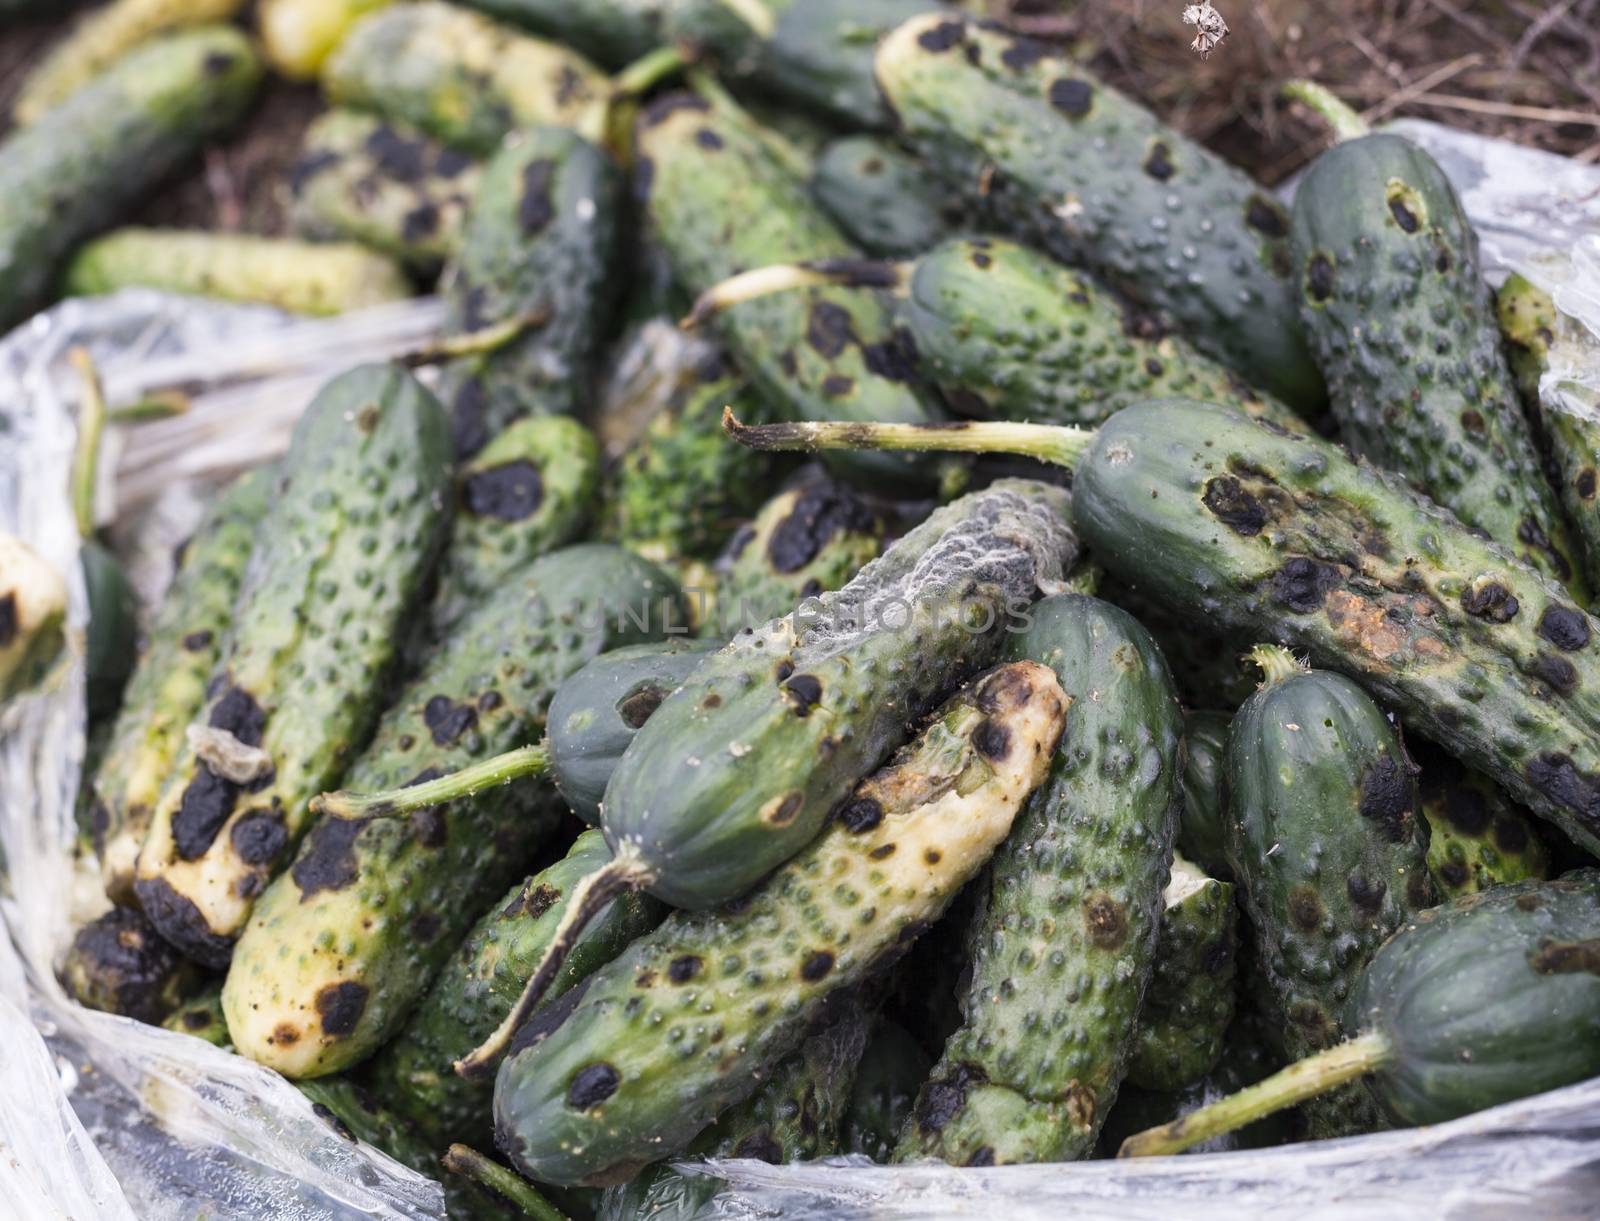 Piles of rotten cucumbers on the landfill by rootstocks